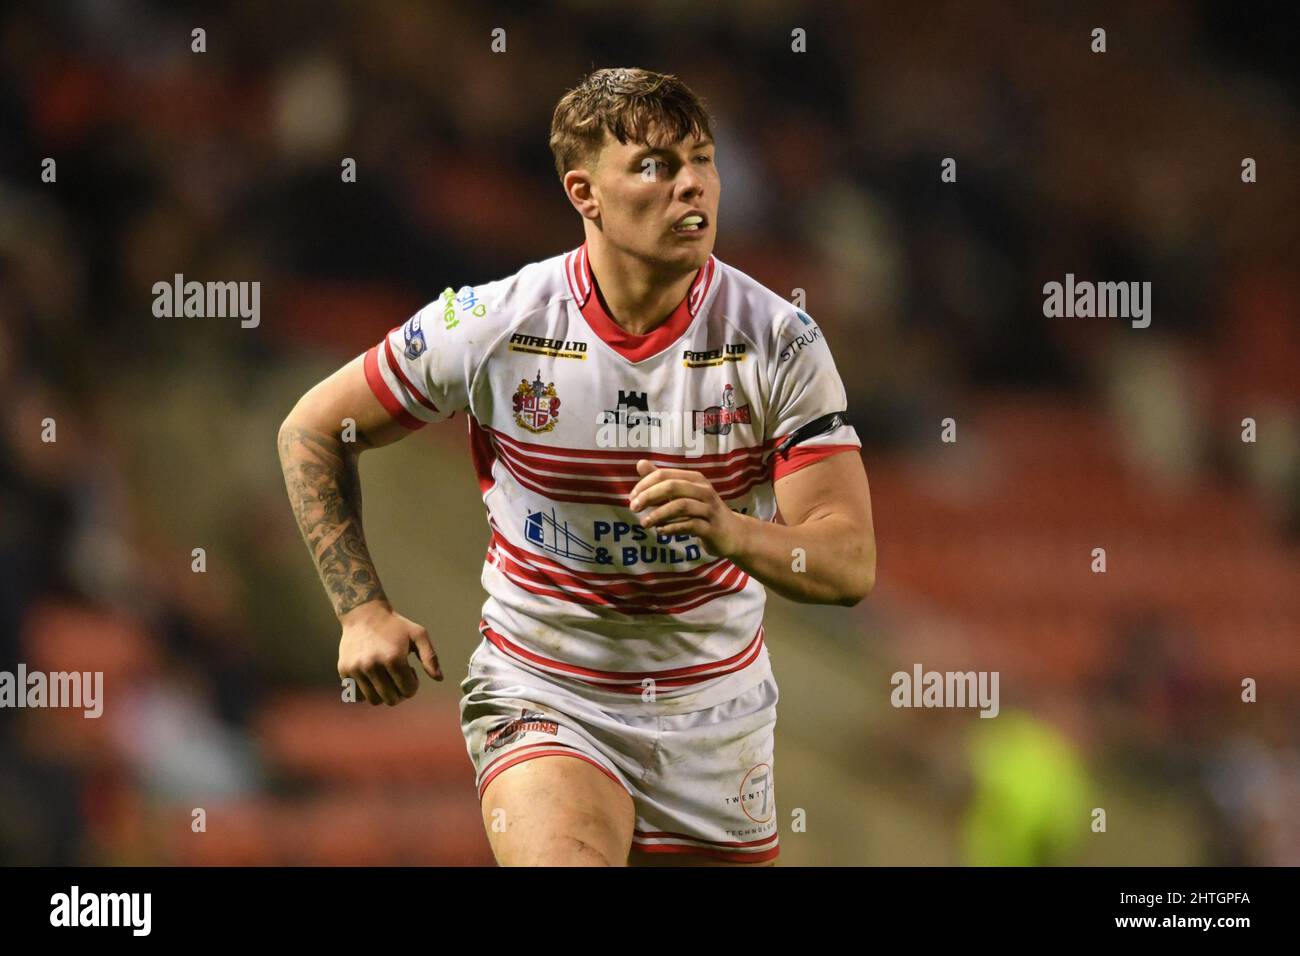 Leigh, UK. 28th Feb, 2022. Keanan Brand #3 of Leigh Centurions in action during the game in Leigh, United Kingdom on 2/28/2022. (Photo by Simon Whitehead/News Images/Sipa USA) Credit: Sipa USA/Alamy Live News Stock Photo